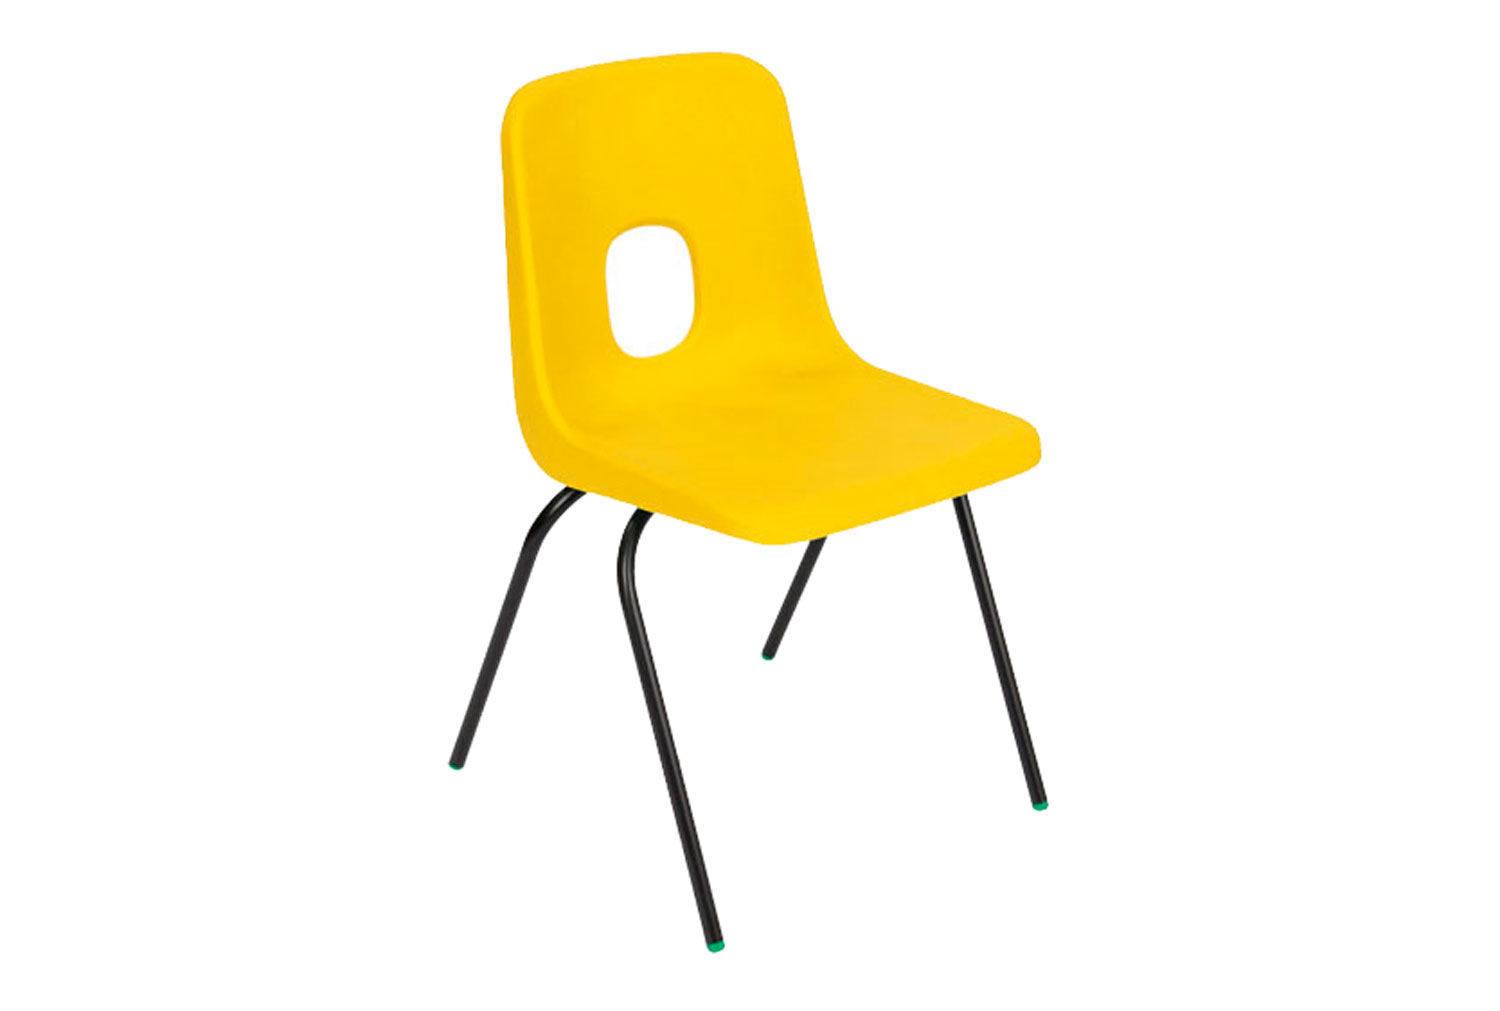 Qty 8 - Hille E Series Classroom Chair, 14+ Years - 41wx37dx46h (cm), Grey Frame, Yellow